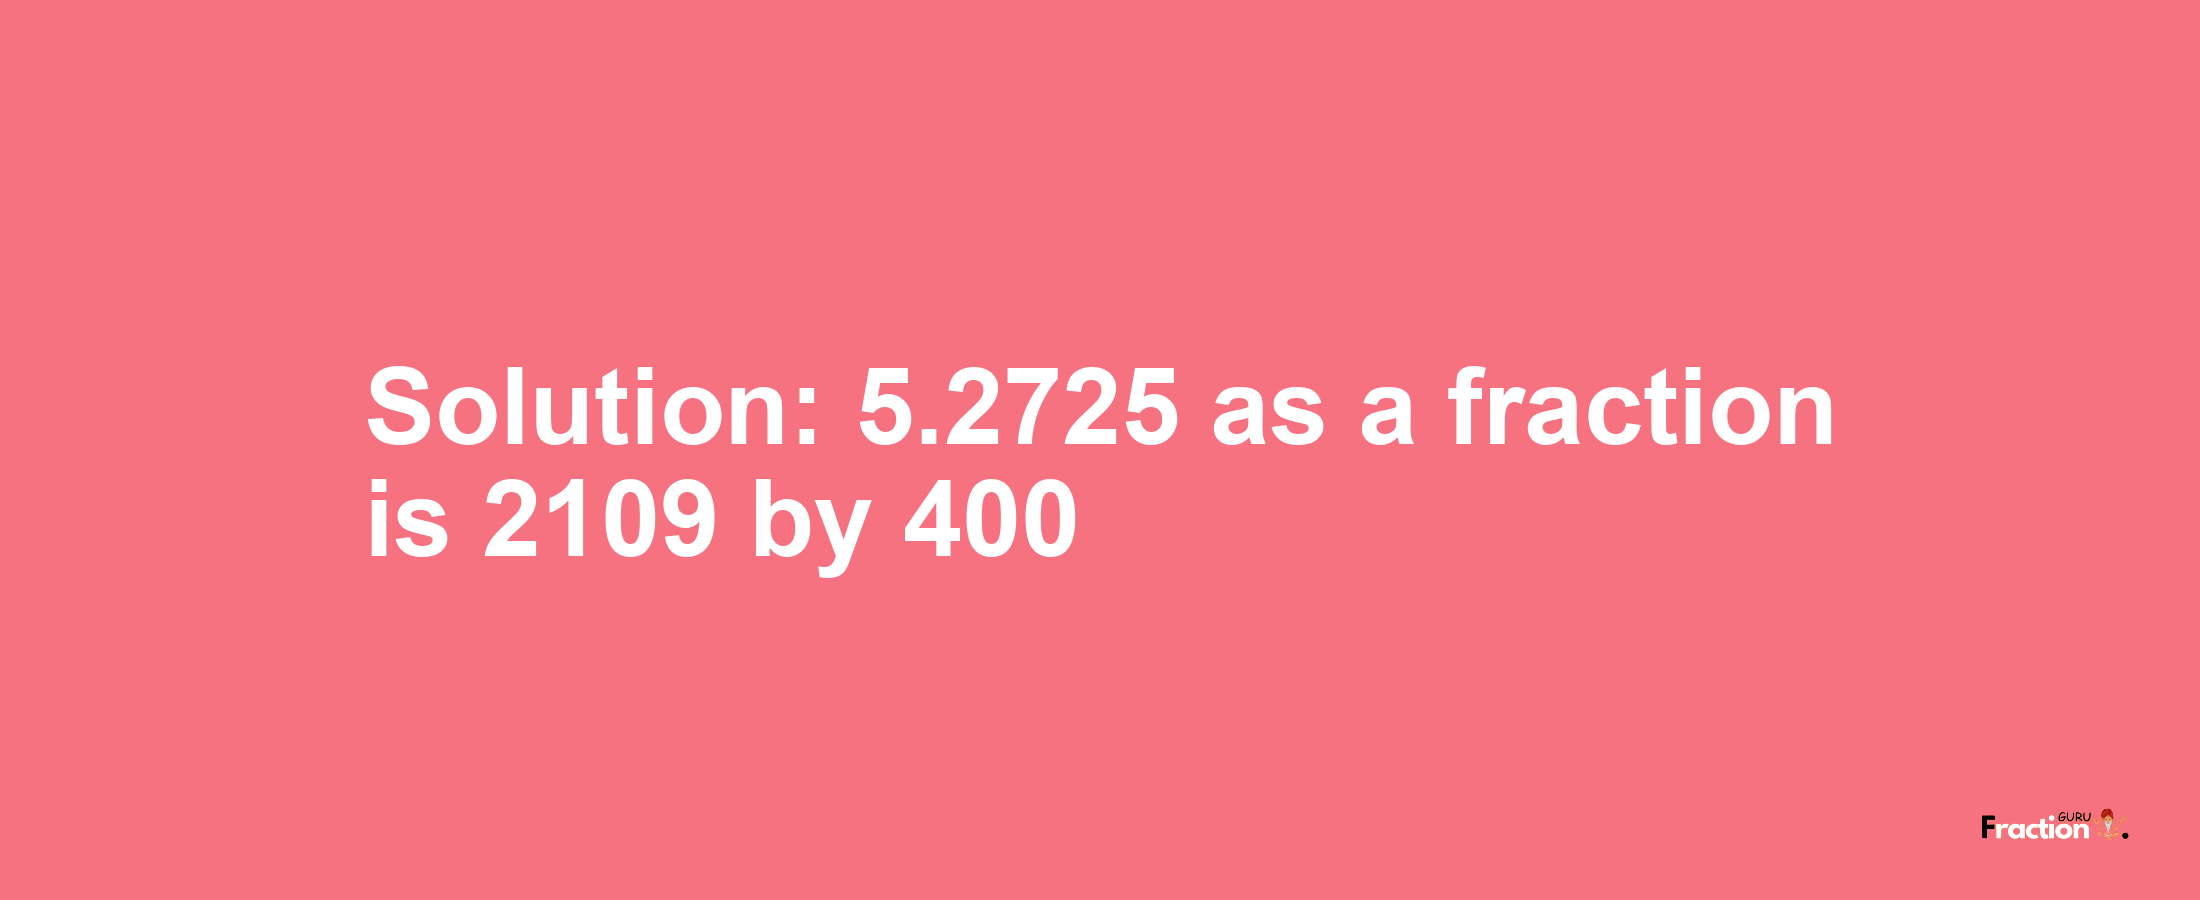 Solution:5.2725 as a fraction is 2109/400